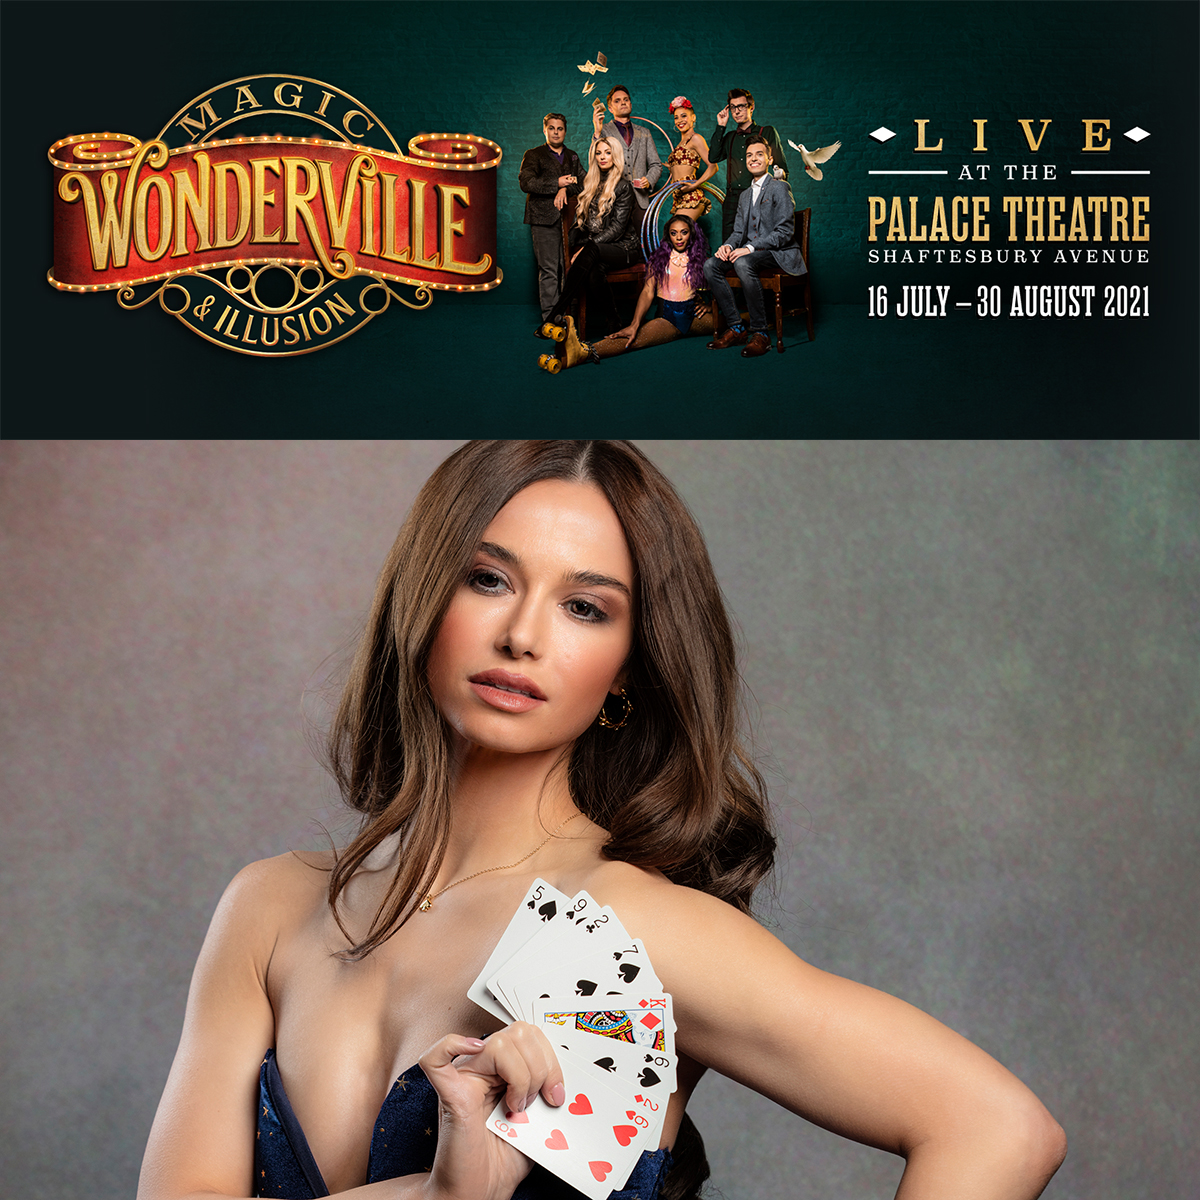 You might know @BGT star, @EmilyEngland__, as a circus performer - but did you know that she's also a fantastic magician? Join us and prepare to be amazed by Emily and our other dazzling stars, live at the Palace Theatre this summer: wondervilleuk.com #WondervilleLive